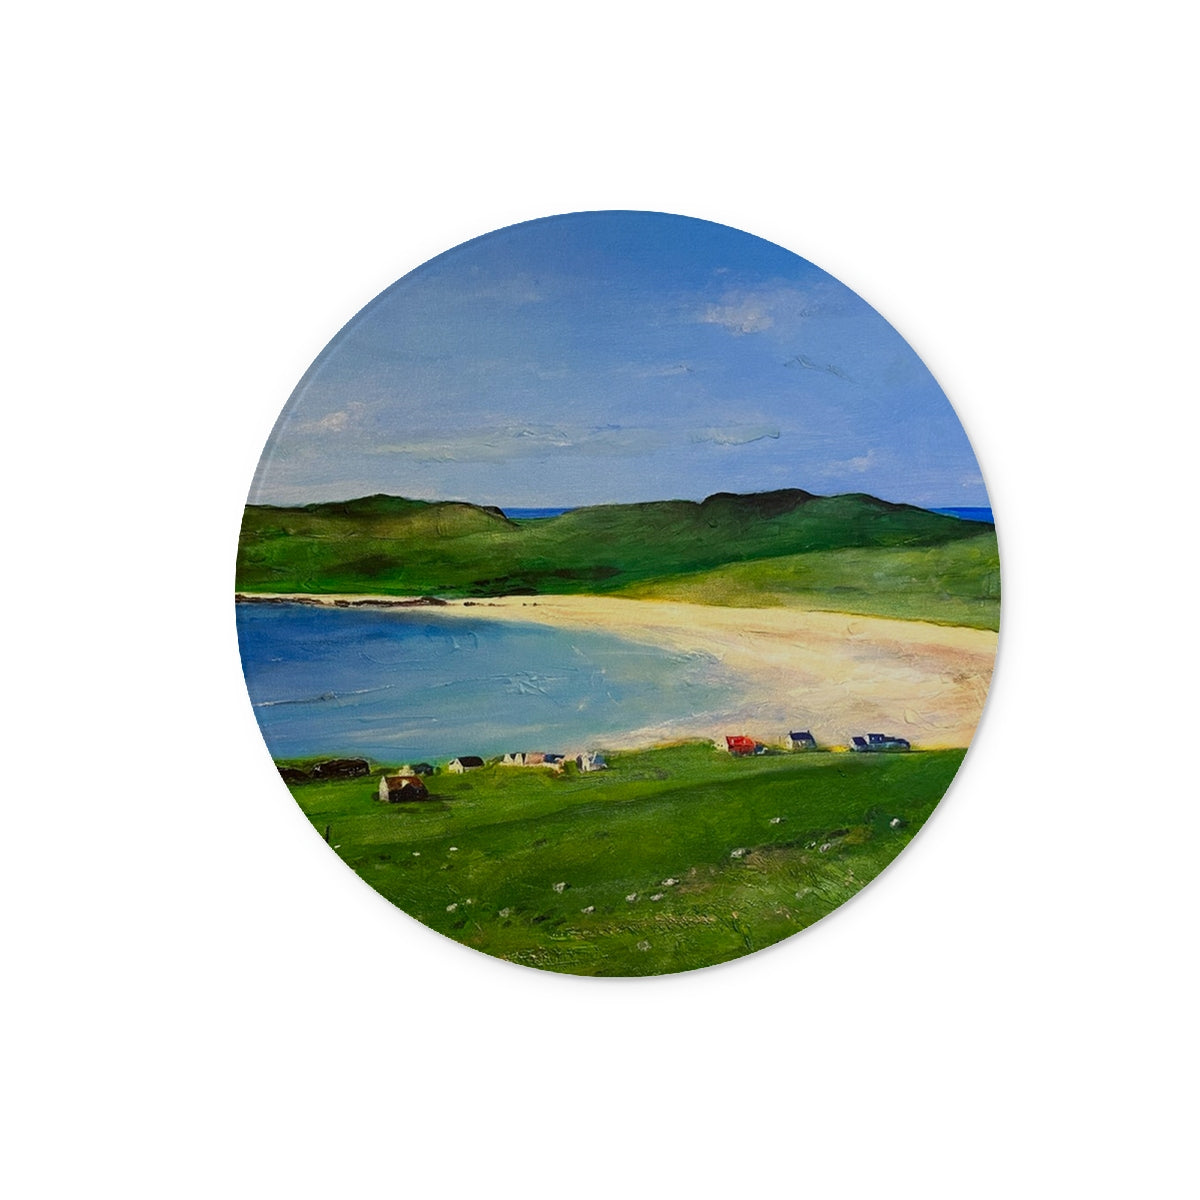 Balephuil Beach Tiree Art Gifts Glass Chopping Board-Glass Chopping Boards-Hebridean Islands Art Gallery-12" Round-Paintings, Prints, Homeware, Art Gifts From Scotland By Scottish Artist Kevin Hunter